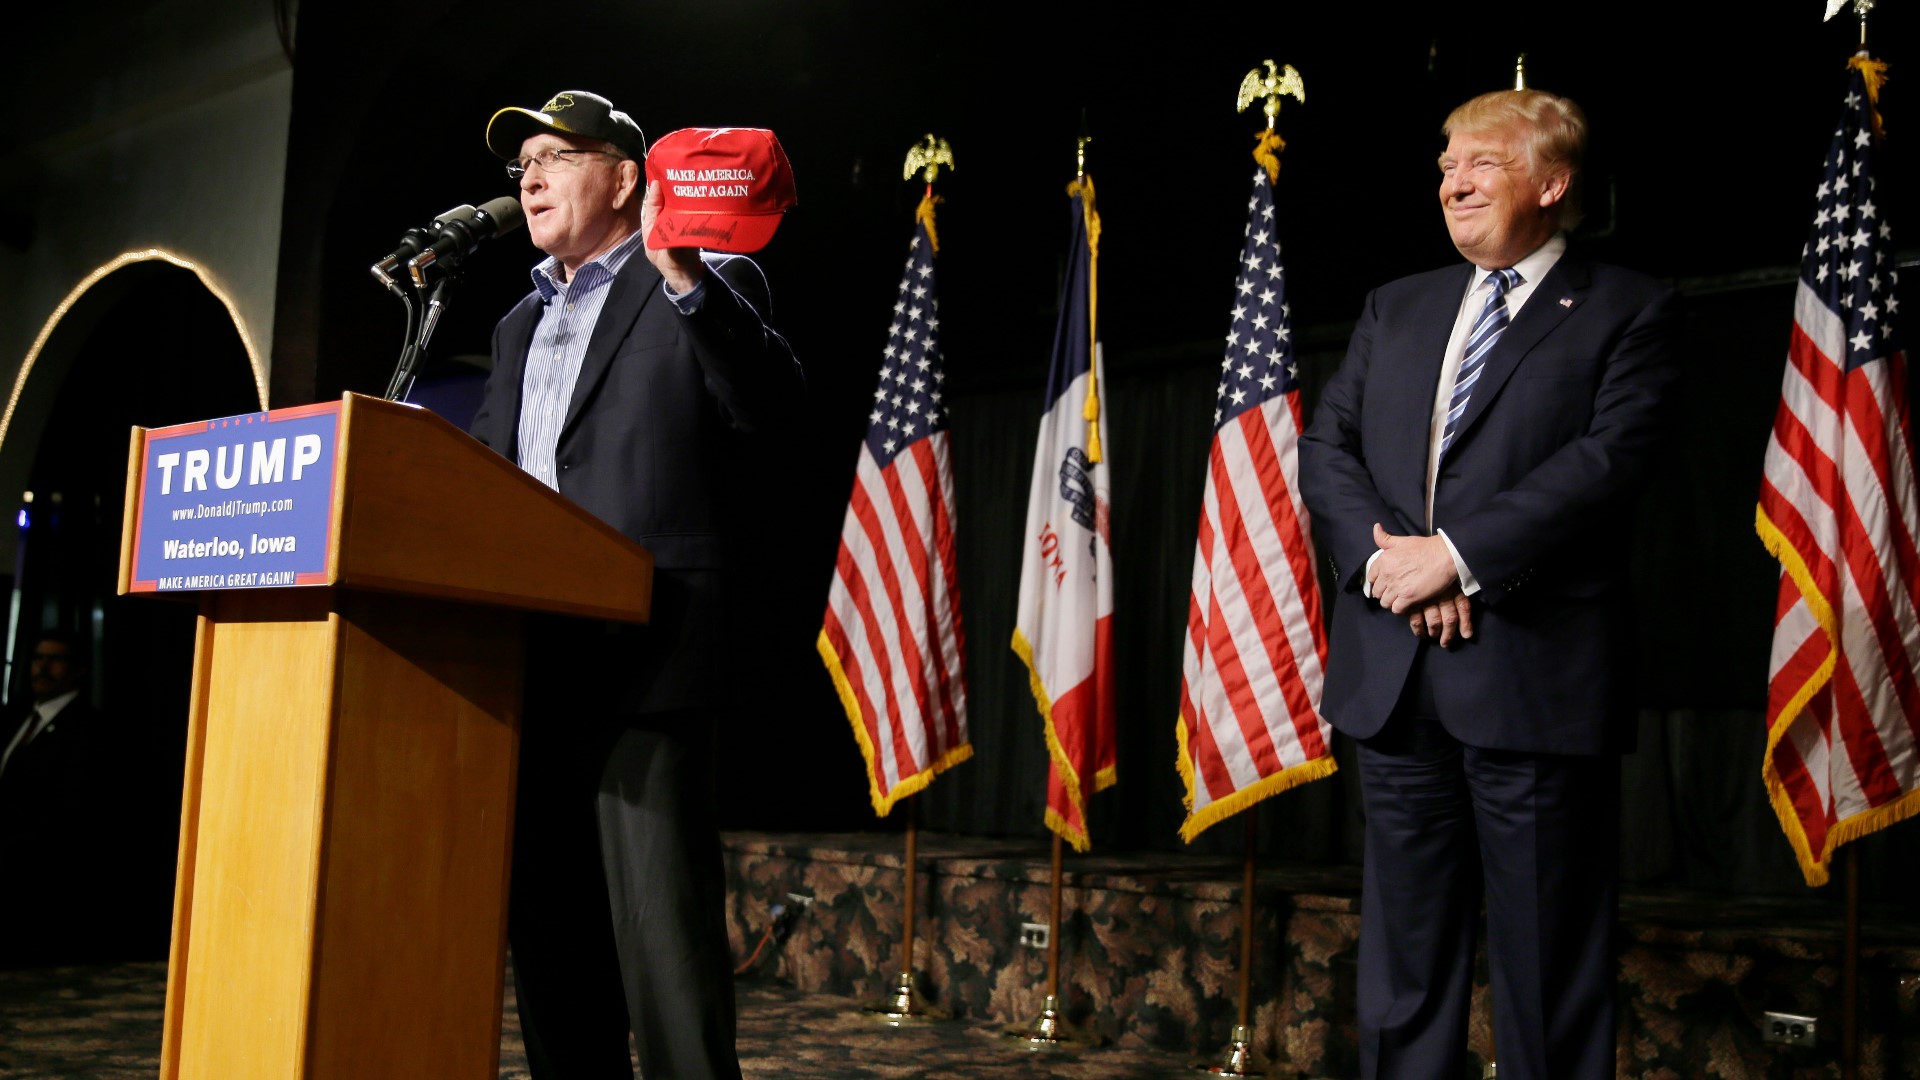 President Trump told Local 5 during an exclusive interview Wednesday morning that he will honor Dan Gable with the award "today or shortly thereafter."